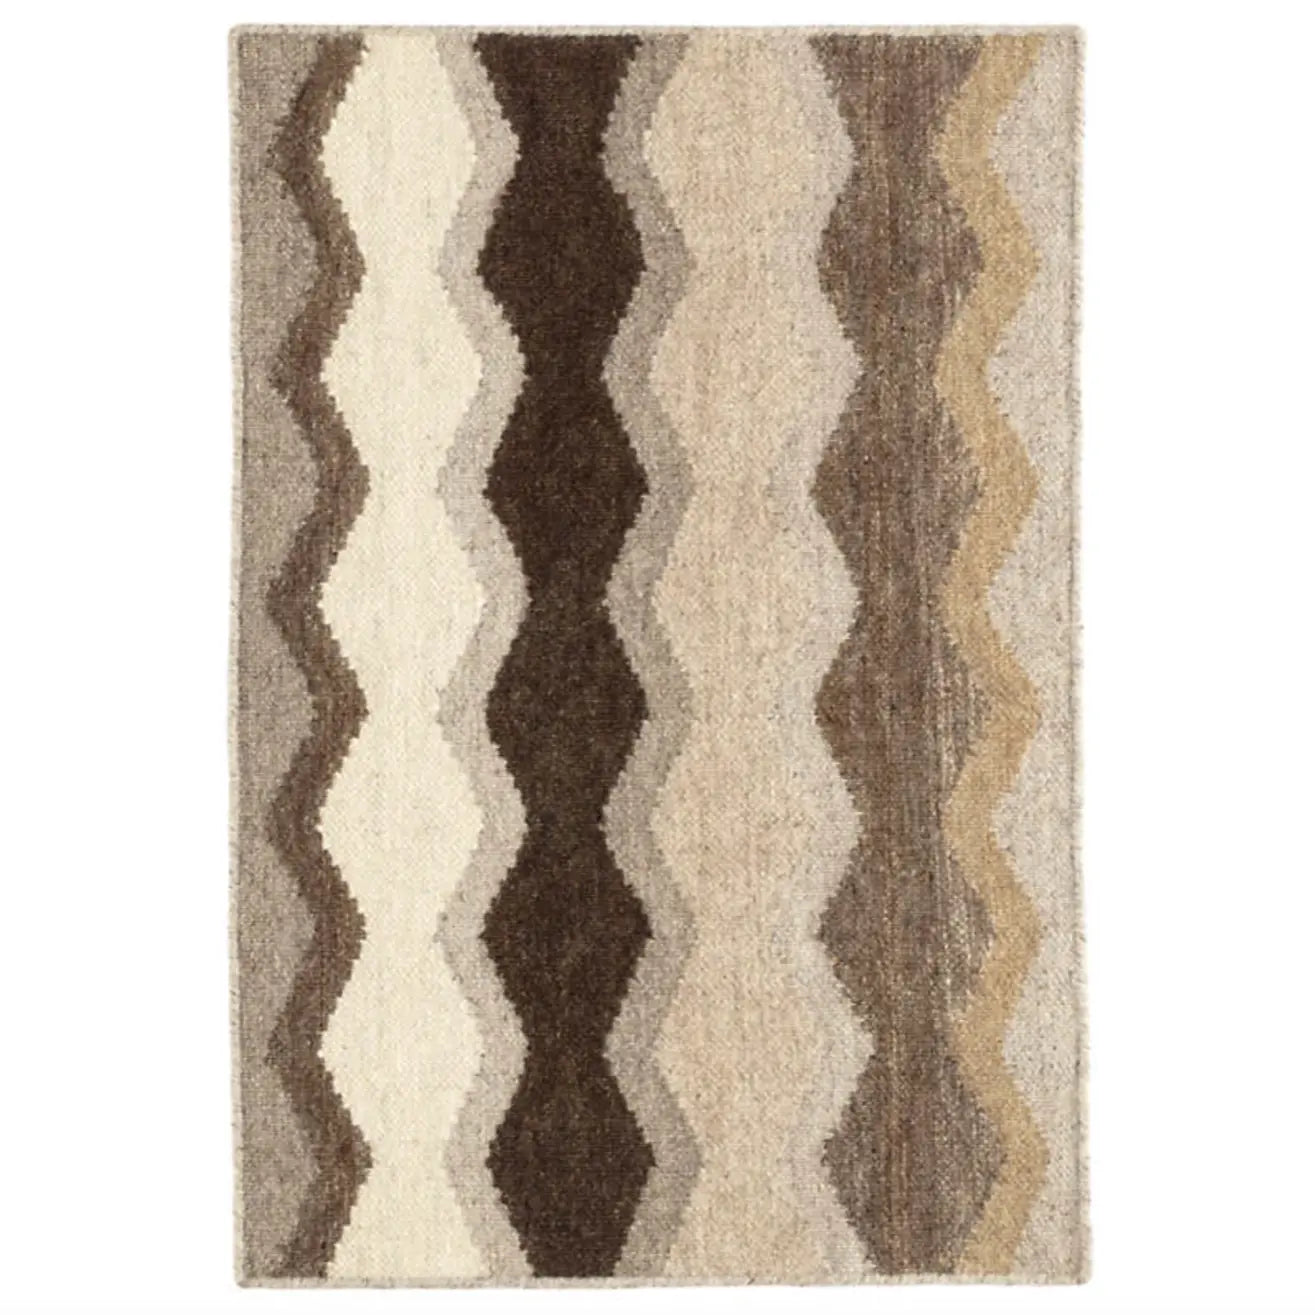 Safety Net Neutral Woven Wool Rug - Home Smith